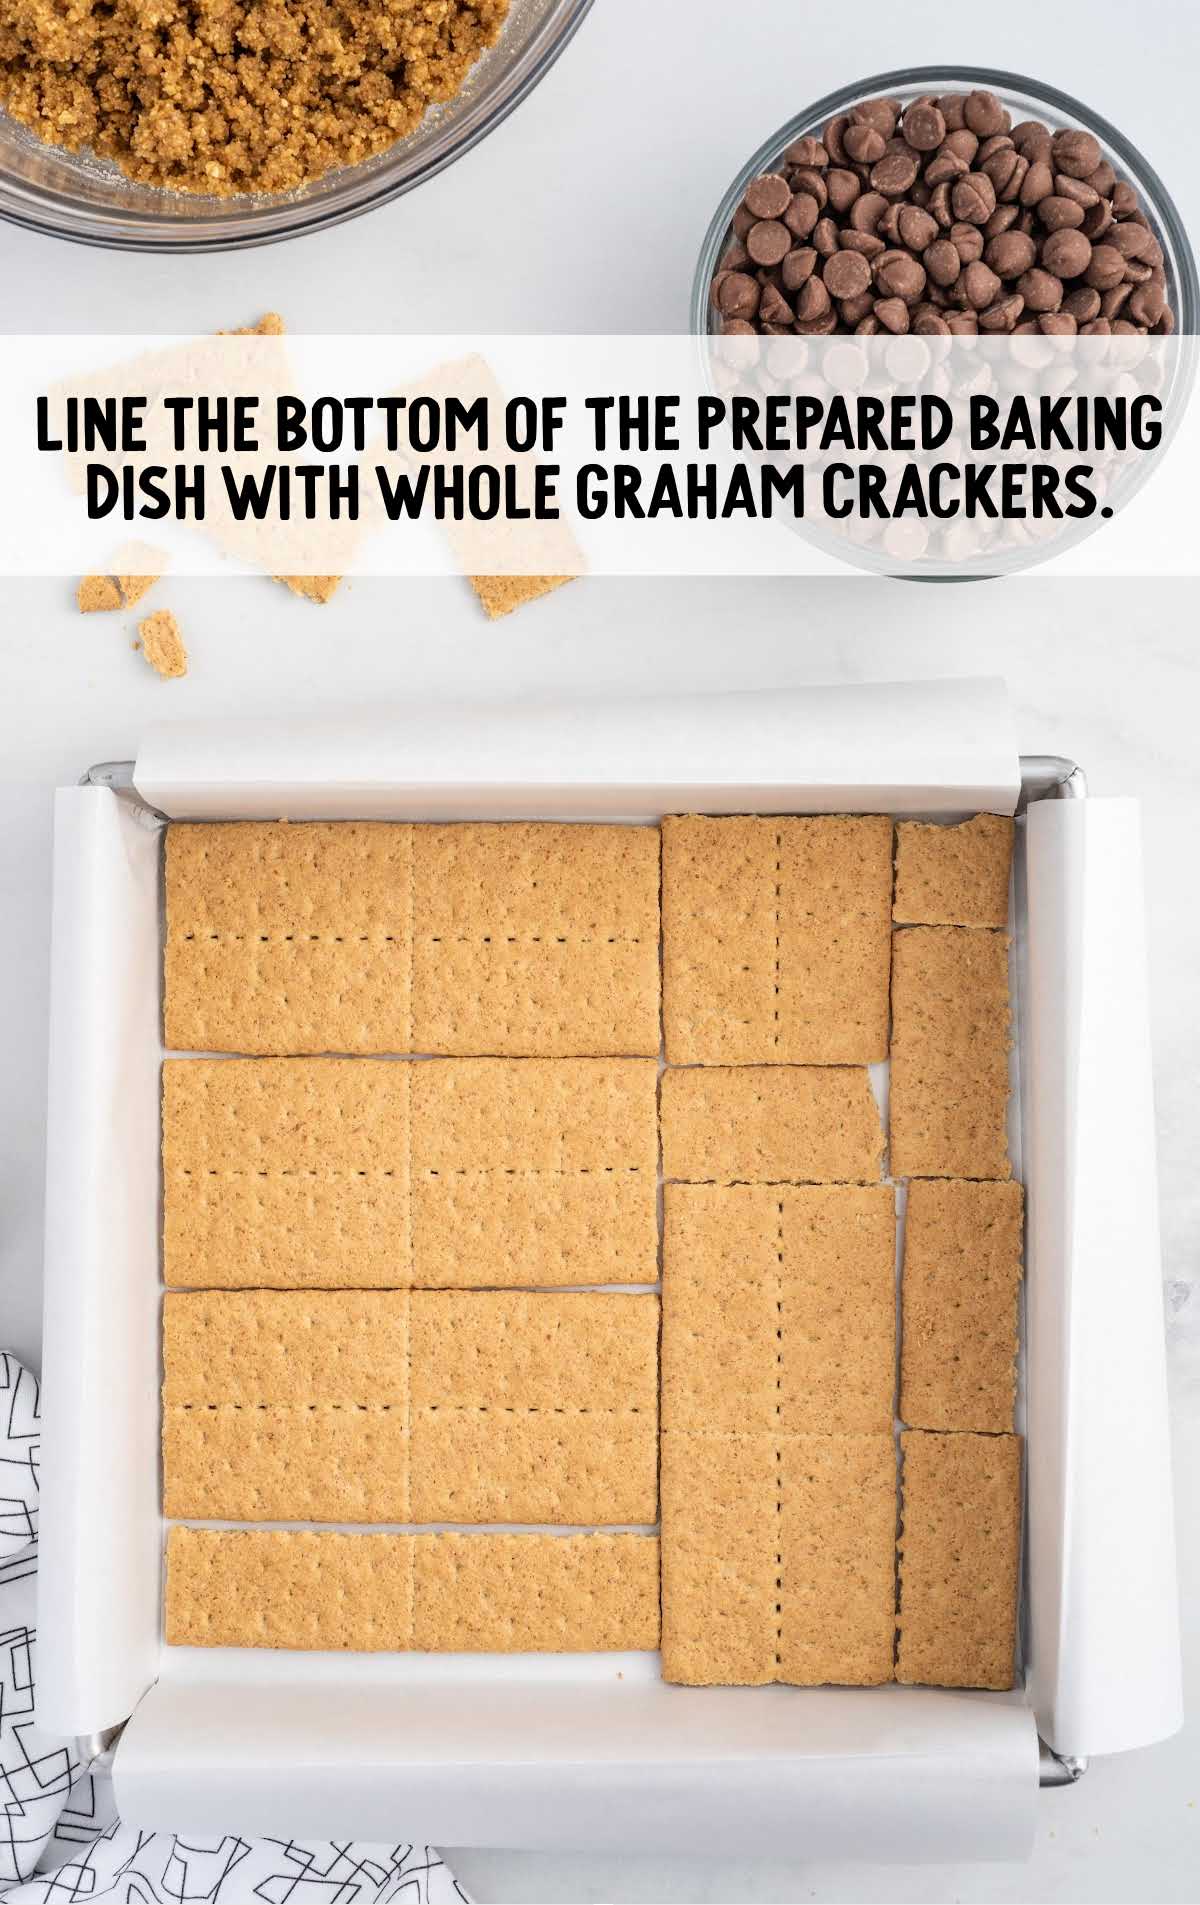 graham crackers lined on the bottom of the baking dish